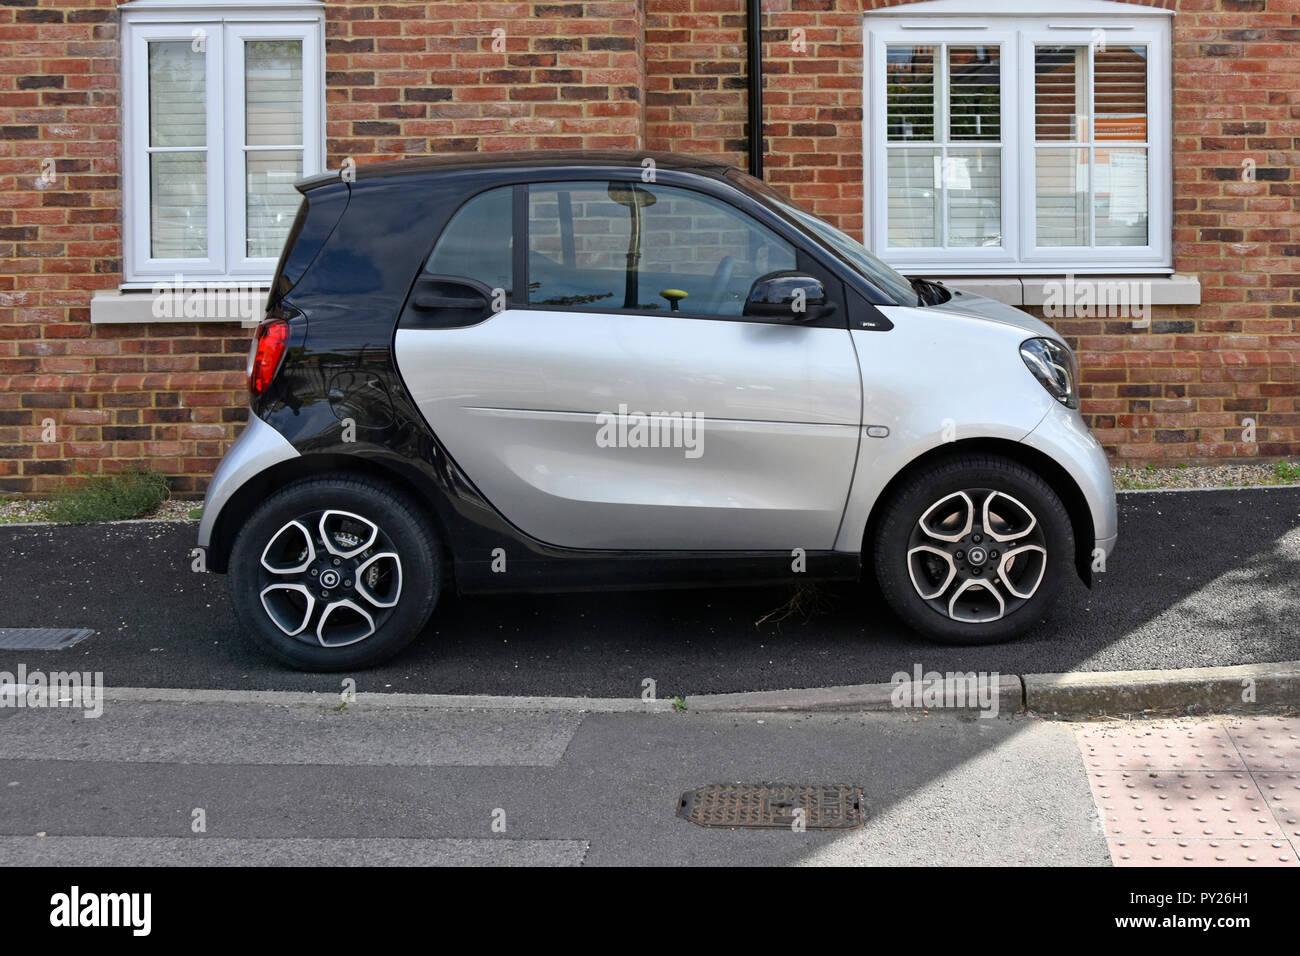 A Daimler Smart small cars compact size fits onto narrow private tarmac pavement car parking spot & space outside apartment window Essex England UK Stock Photo